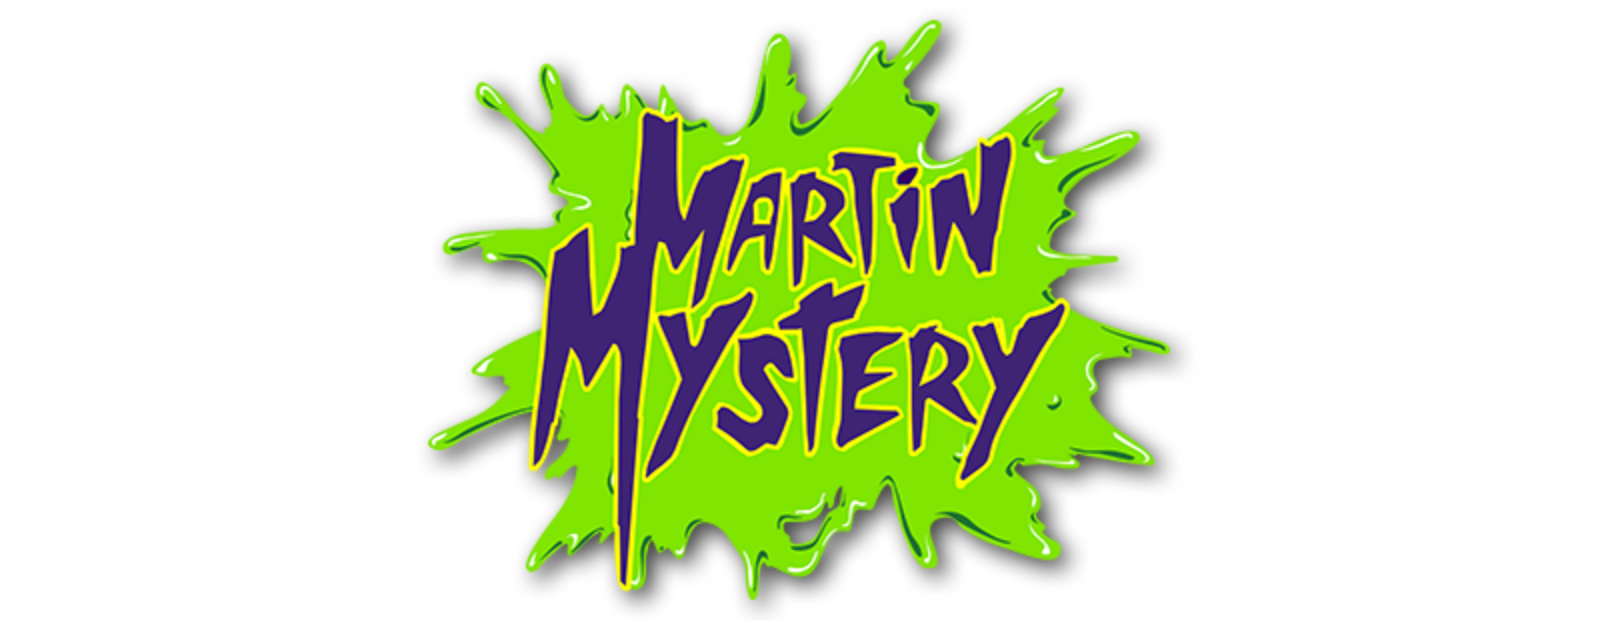 Martin Mystery Volume 1 and 2 (7 DVDs Box Set)